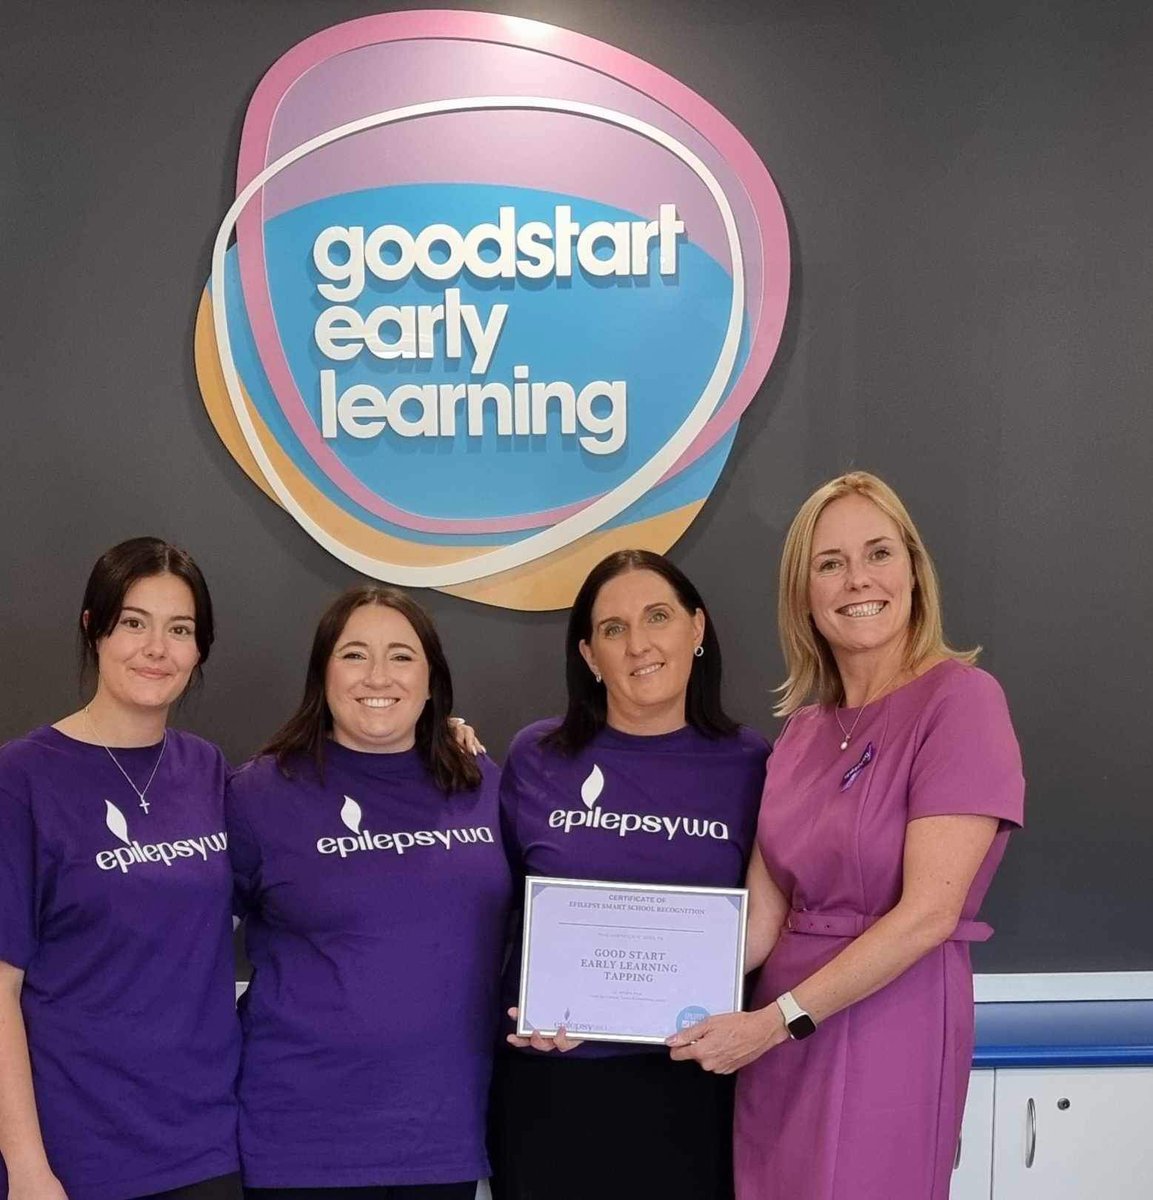 Goodstart Tapping earns @EpilepsyWA 'Epilepsy Smart' Status! We applaud the Tapping team for being champions of inclusive education, creating a safe and supportive space where all children can engage in learning experiences.